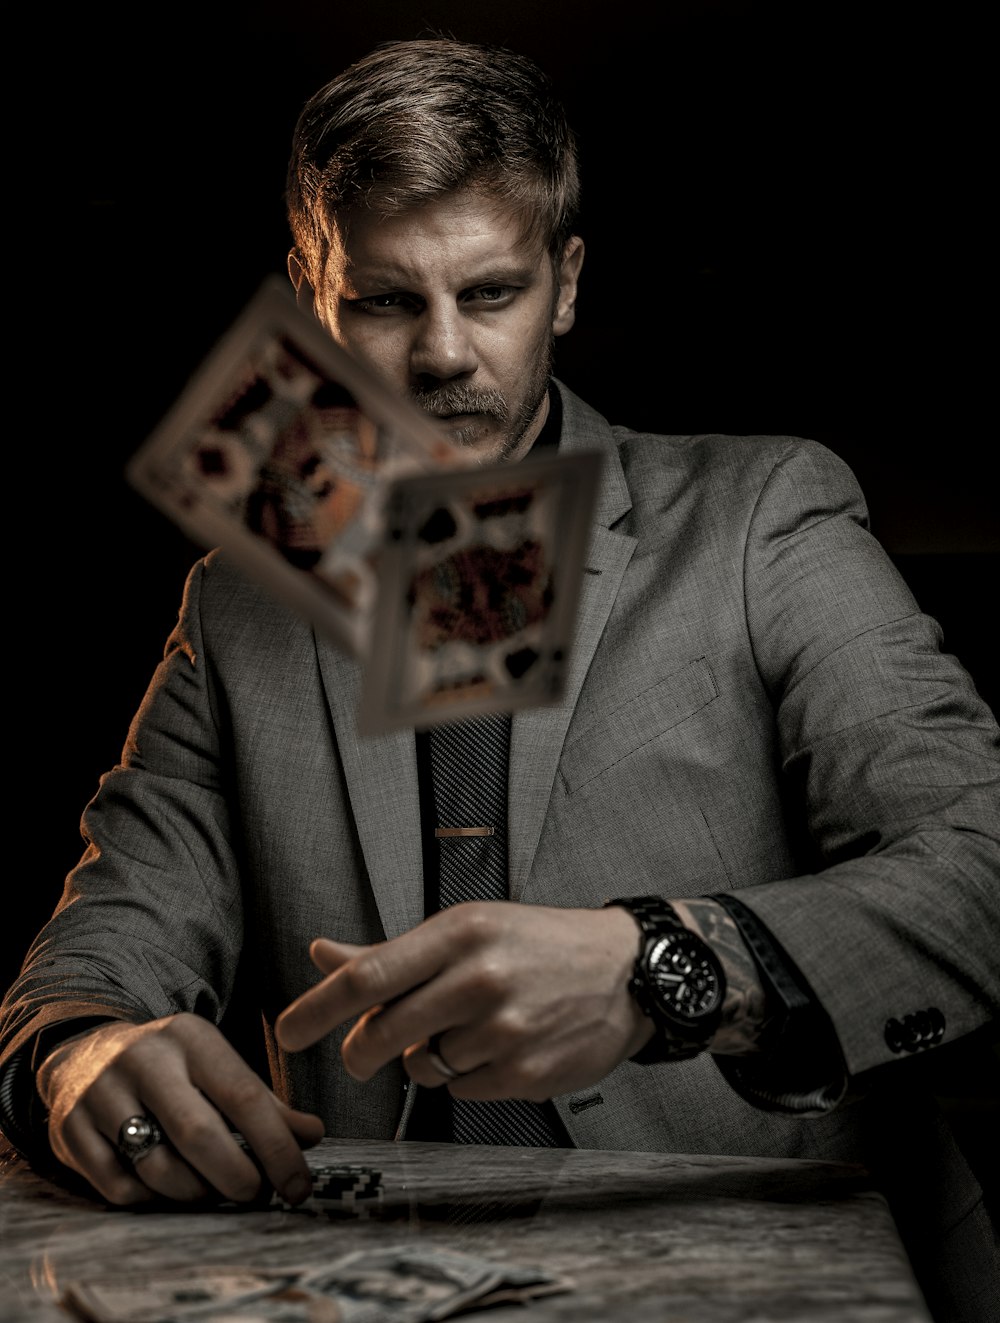 man in gray suit jacket holding jack of diamonds playing card